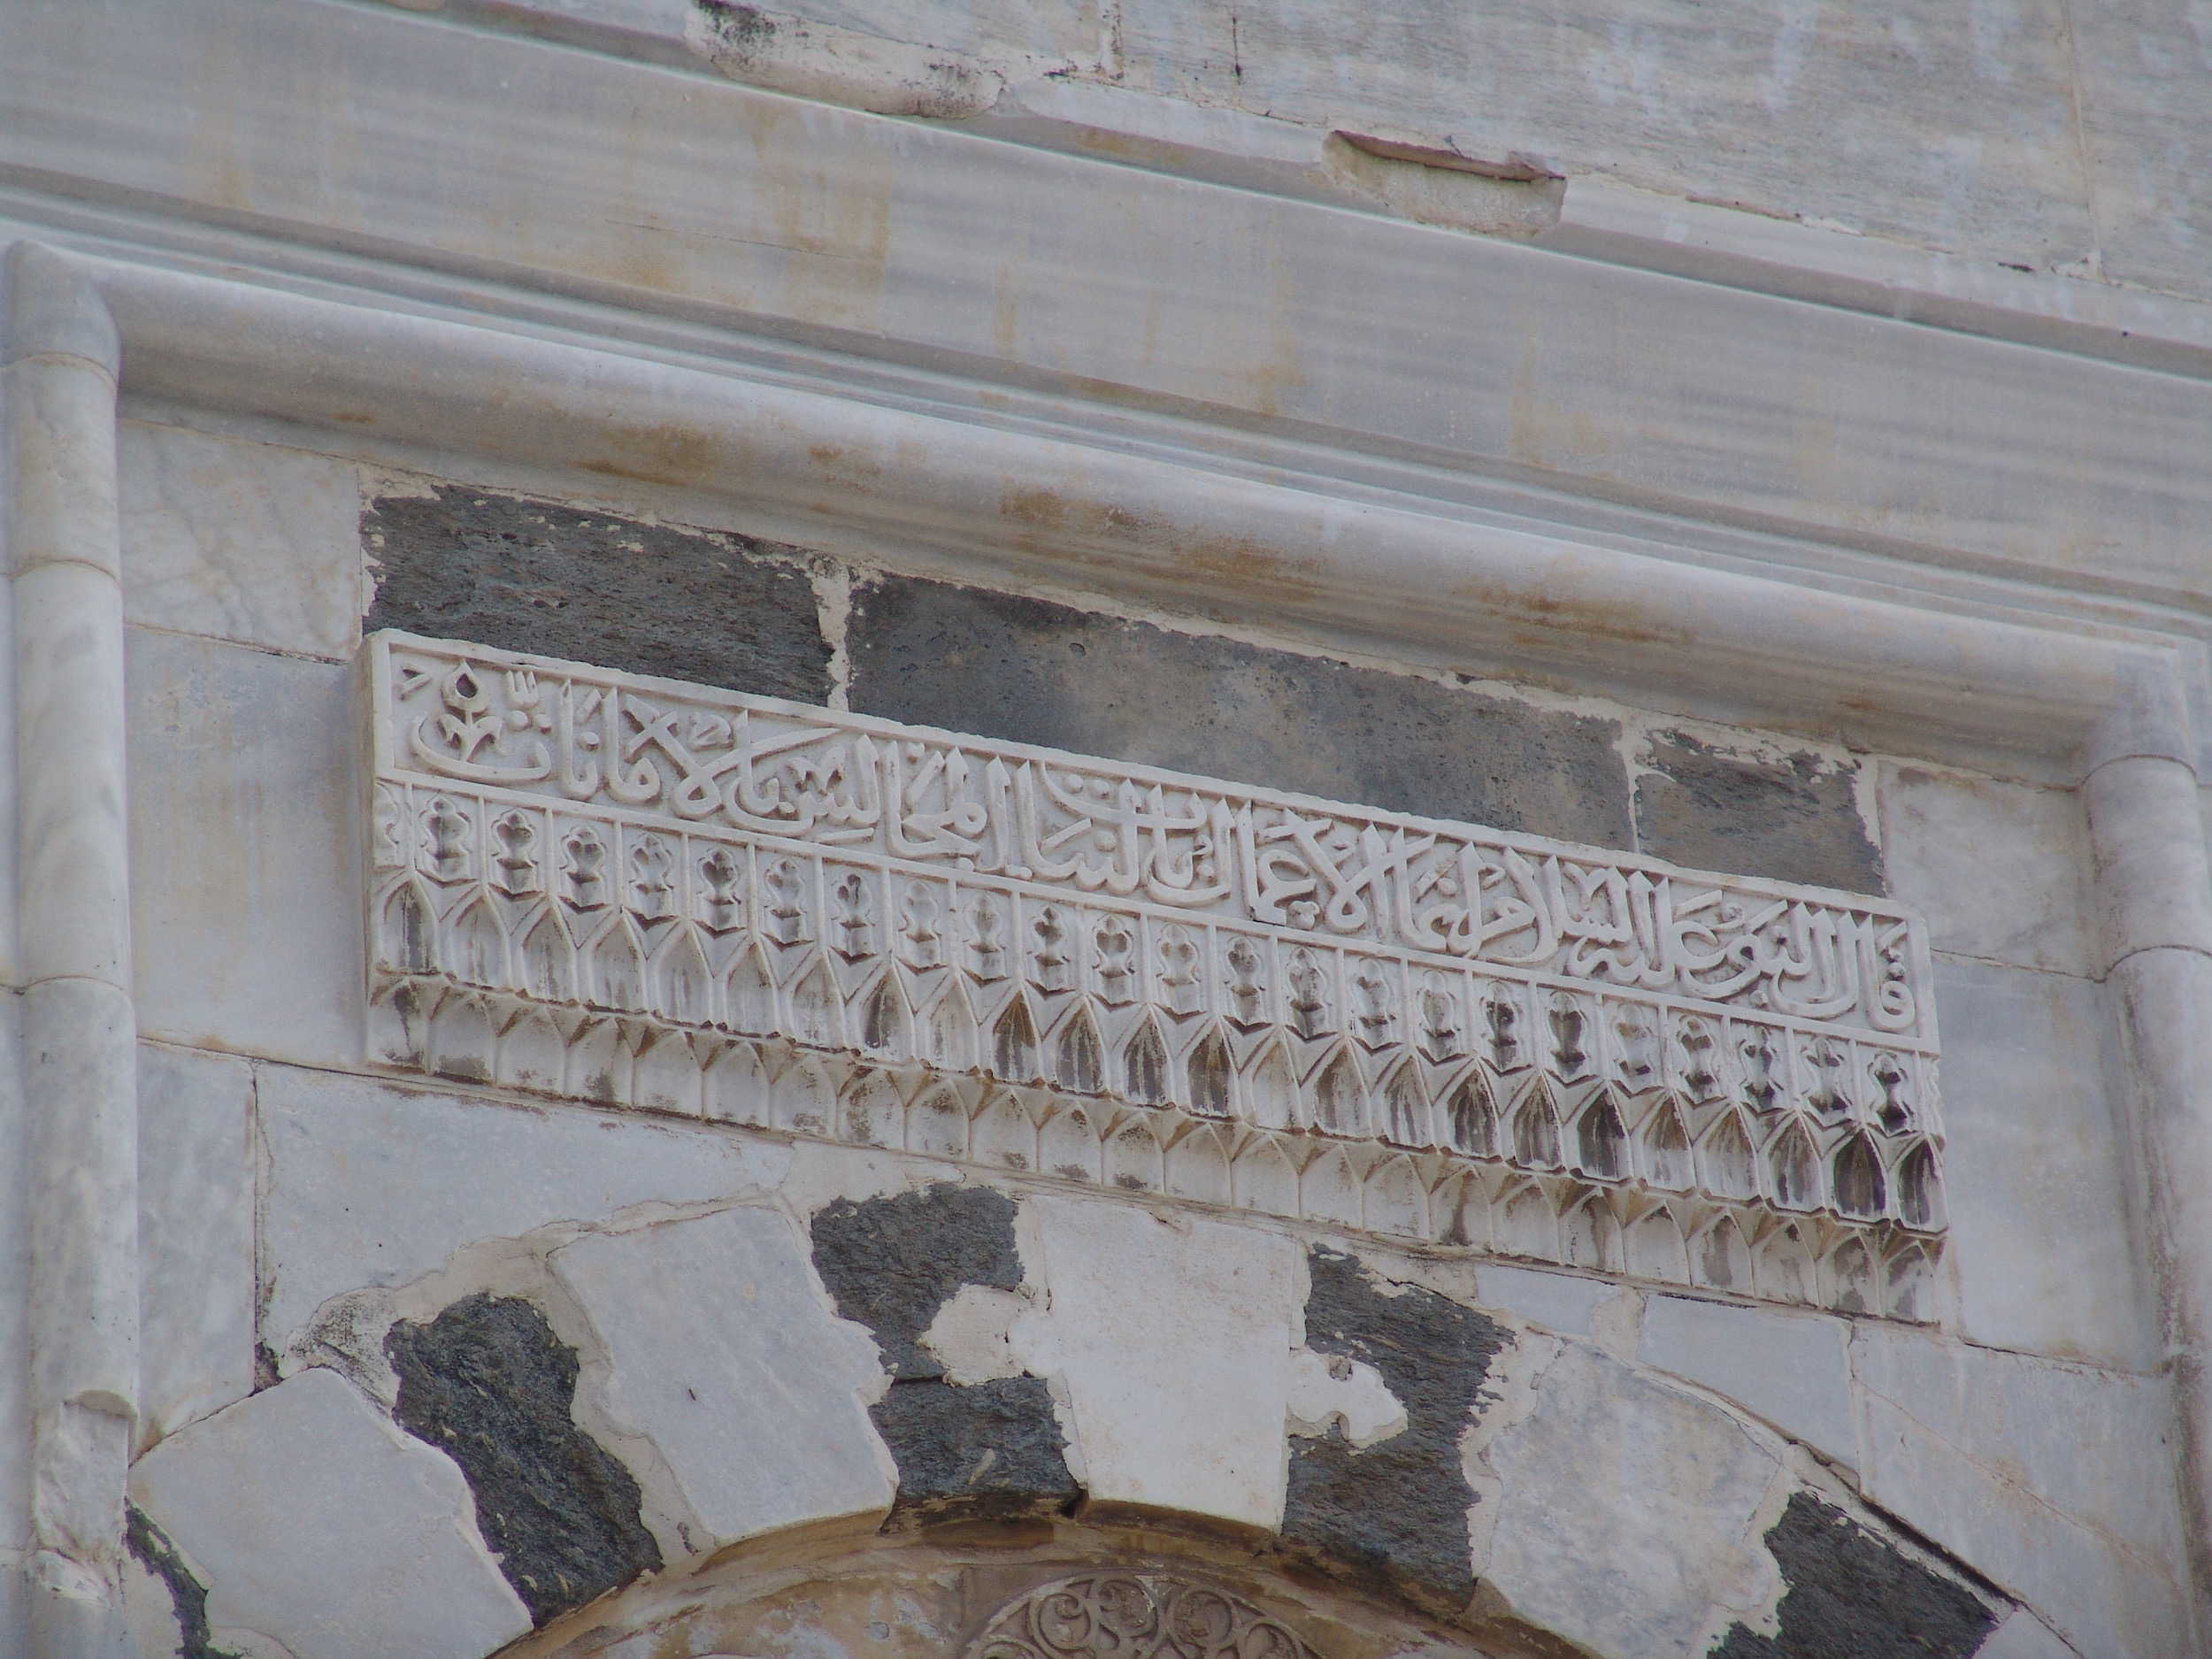 Inscription above the entrance to the courtyard of the Isa Bey Mosque